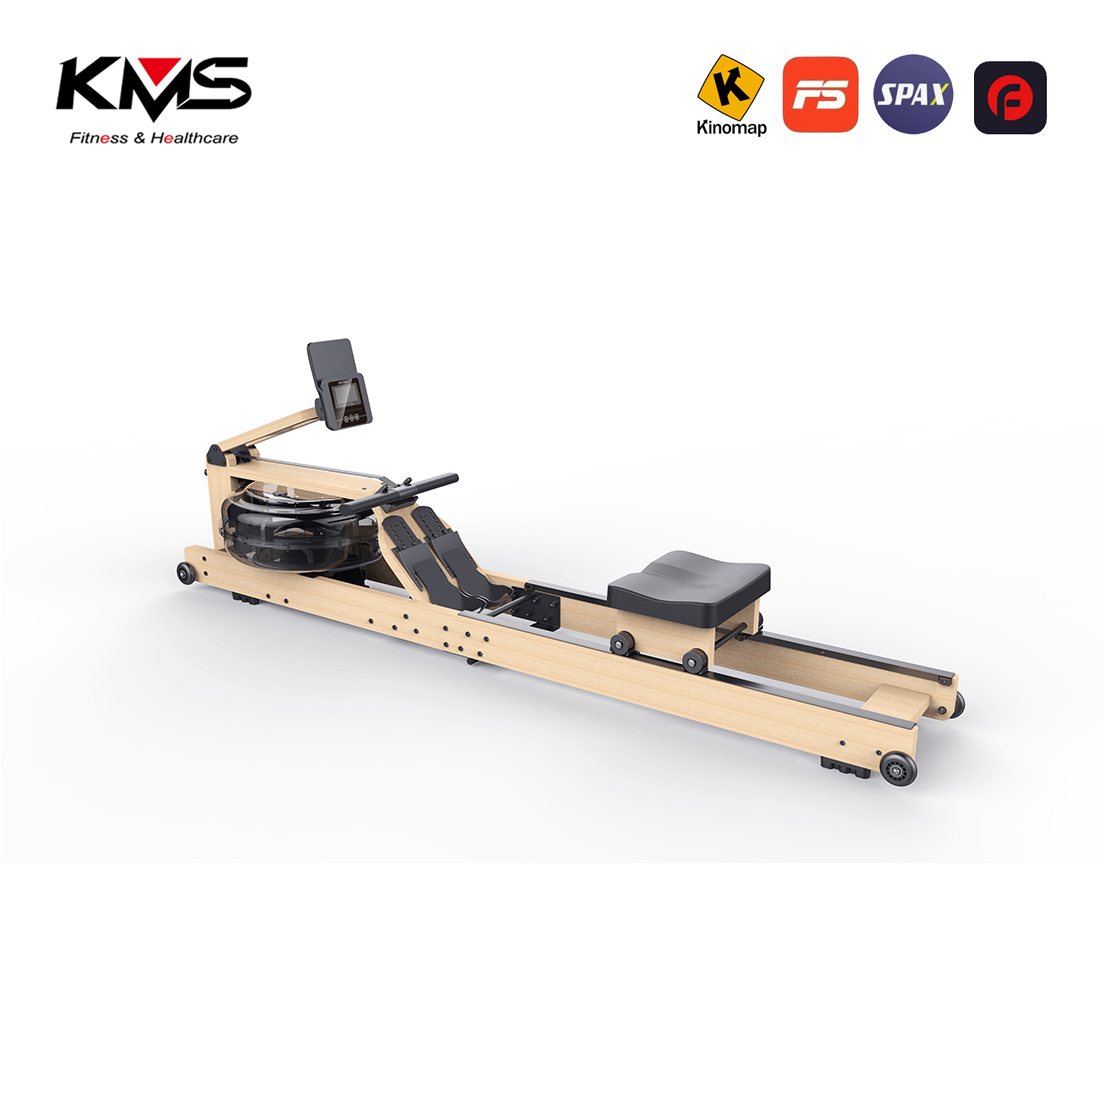 LCD Monitor Water Resistance ပါရှိသော Wood Water Rower